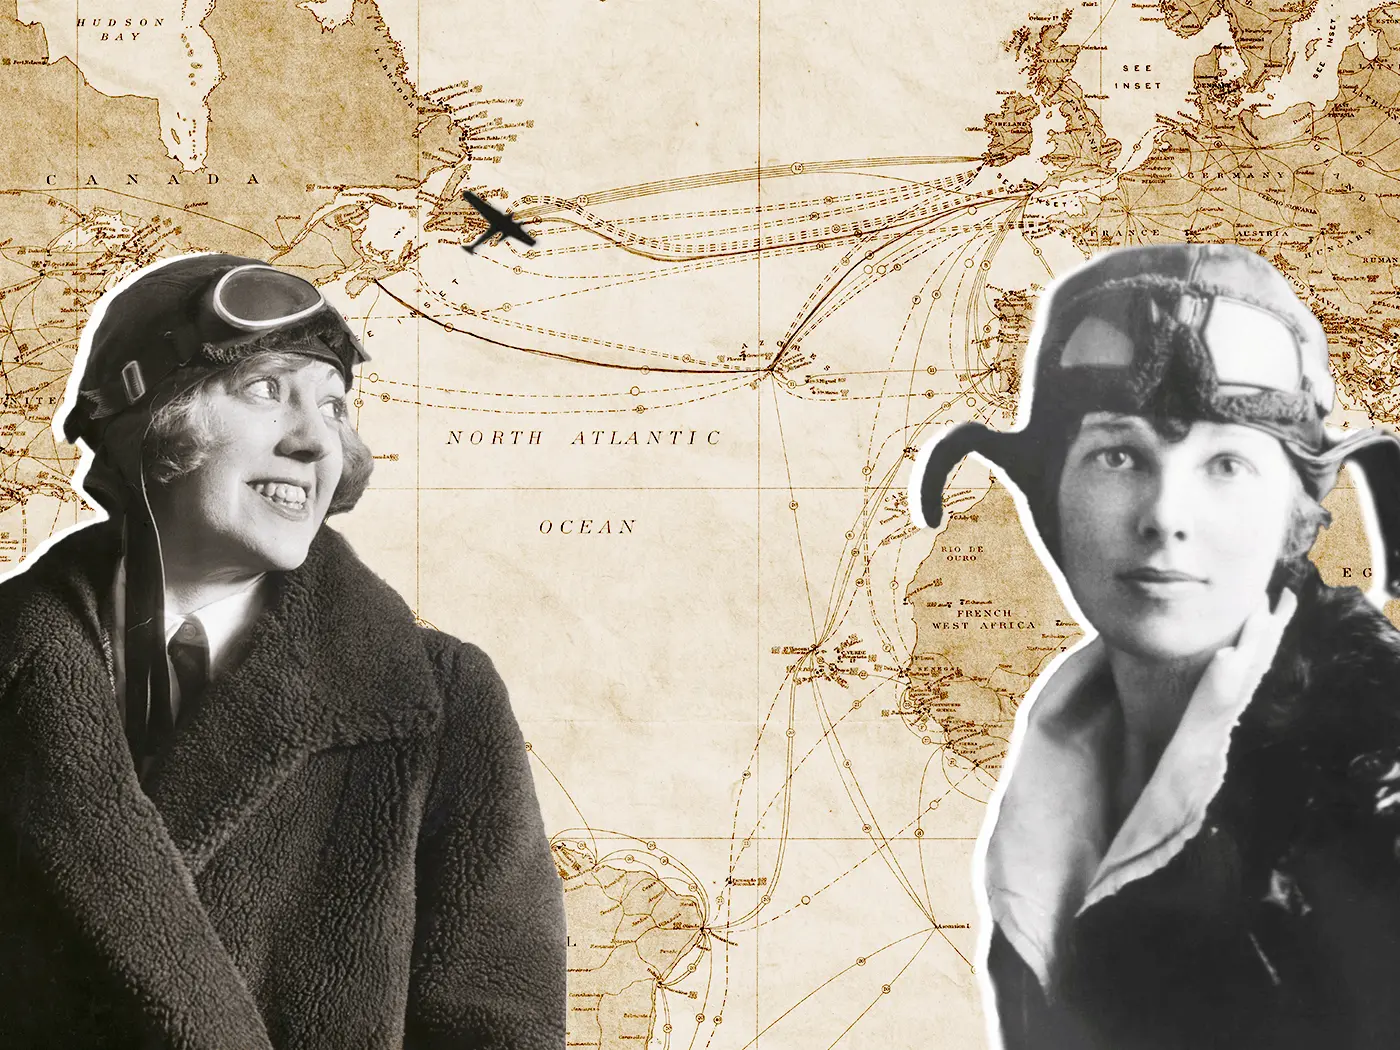 Mabel Boll, nicknamed the &quot;Queen of Diamonds&quot; (left), failed to cross the Atlantic before Amelia Earhart (right).